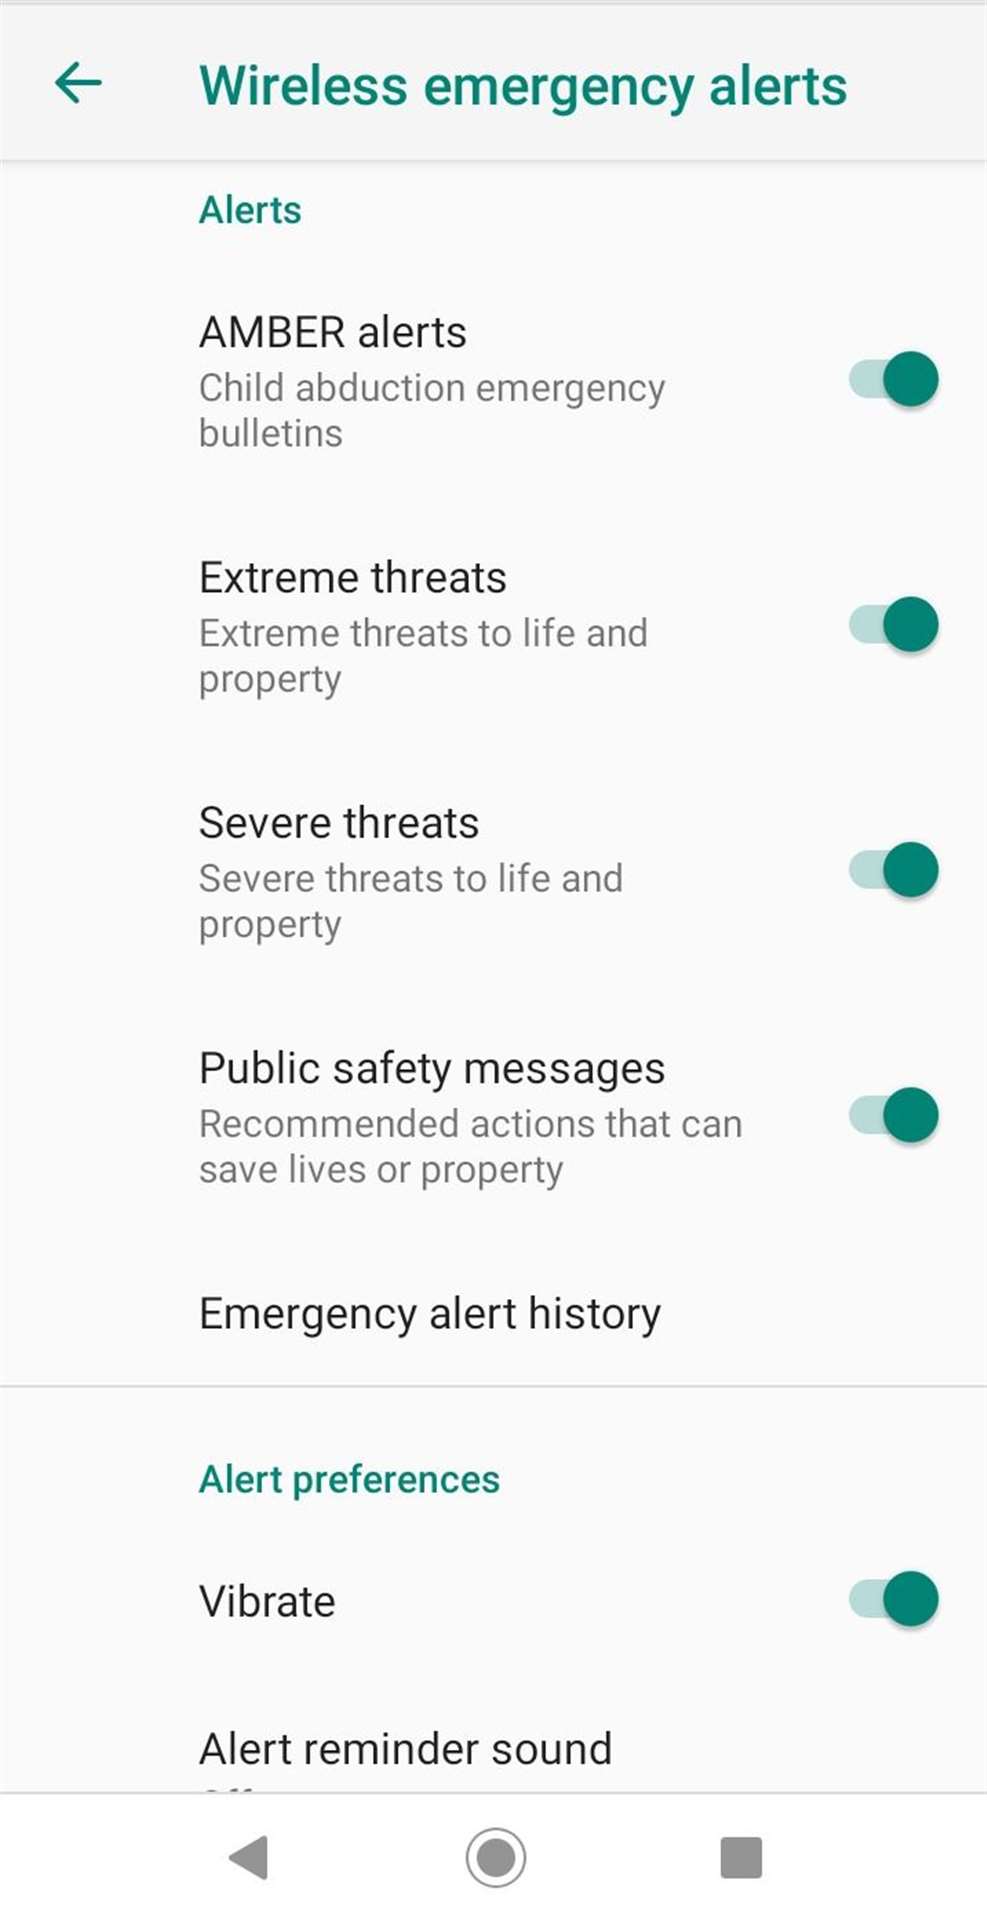 How the Emergency Alerts settings currently appear on an Android device